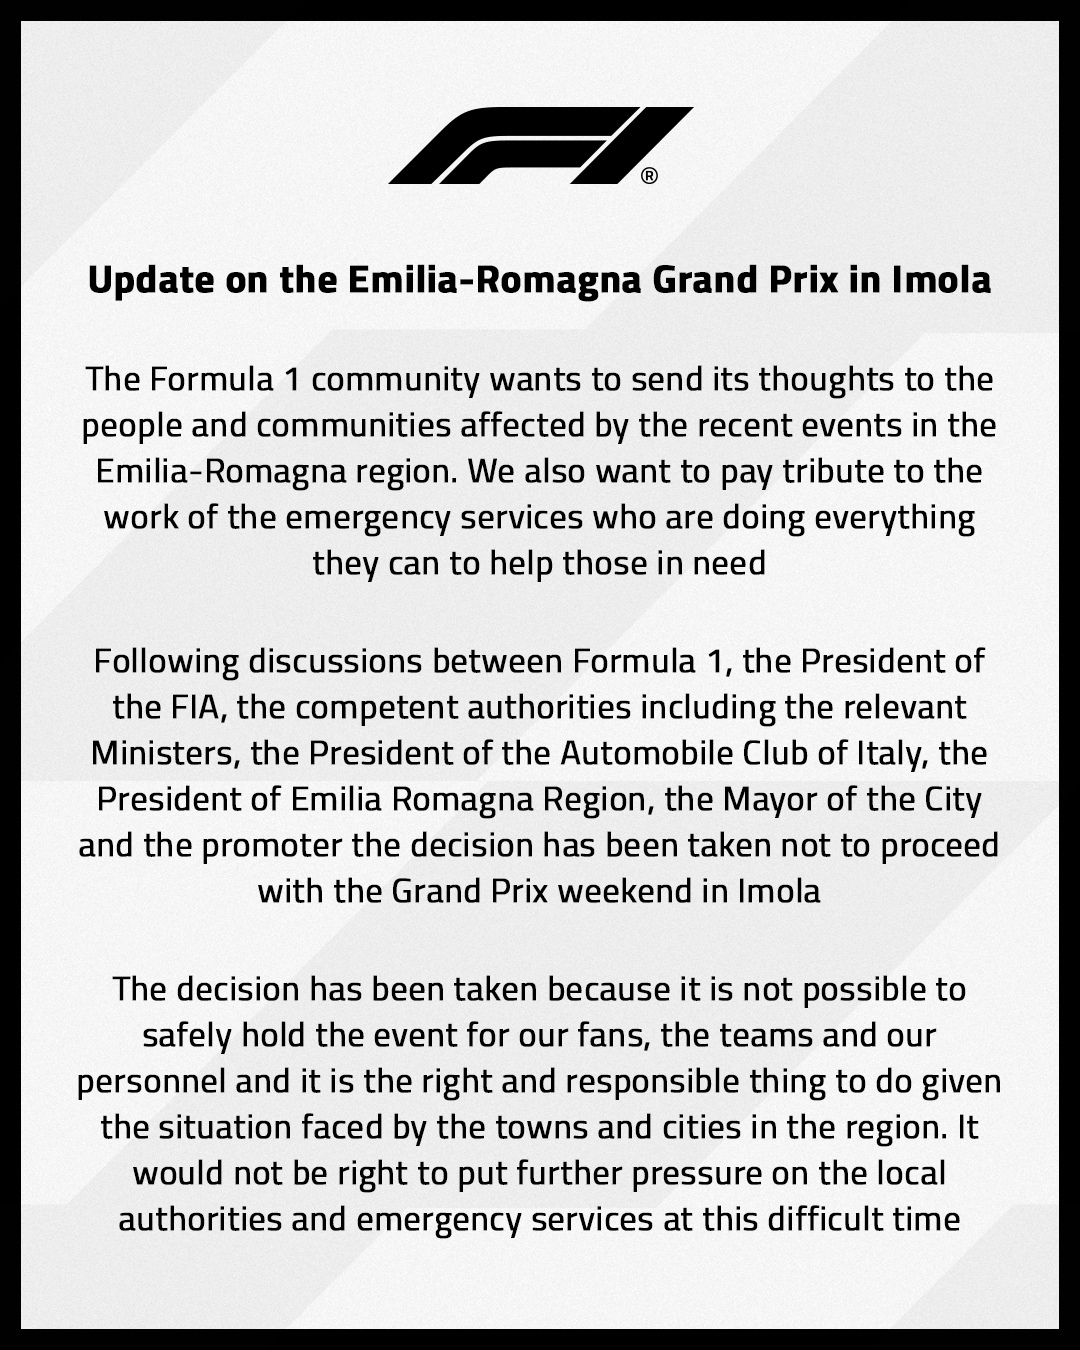 The Formula 1 community wants to send it’s thoughts to the people and communities affected by the recent events in the Emilia-Romagna region. We also want to pay tribute to the work of the emergency services who are doing everything they can to help those in need. Following discussions between Formula 1, the President of the FIA, the competent authorities including the relevant Ministers, the President of the Automobile Club of Italy, the President of Emilia Romagna Region, the Mayor of the City and the promoter the decision has been taken not to proceed with the Grand Prix weekend in Imola. The decision has been taken because it is not possible to safely hold the event for our fans, the teams and our personnel and it is the right and responsible thing to do given the situation faced by the towns and cities in the region. It would not be right to put further pressure on the local authorities and emergency services at this difficult time.